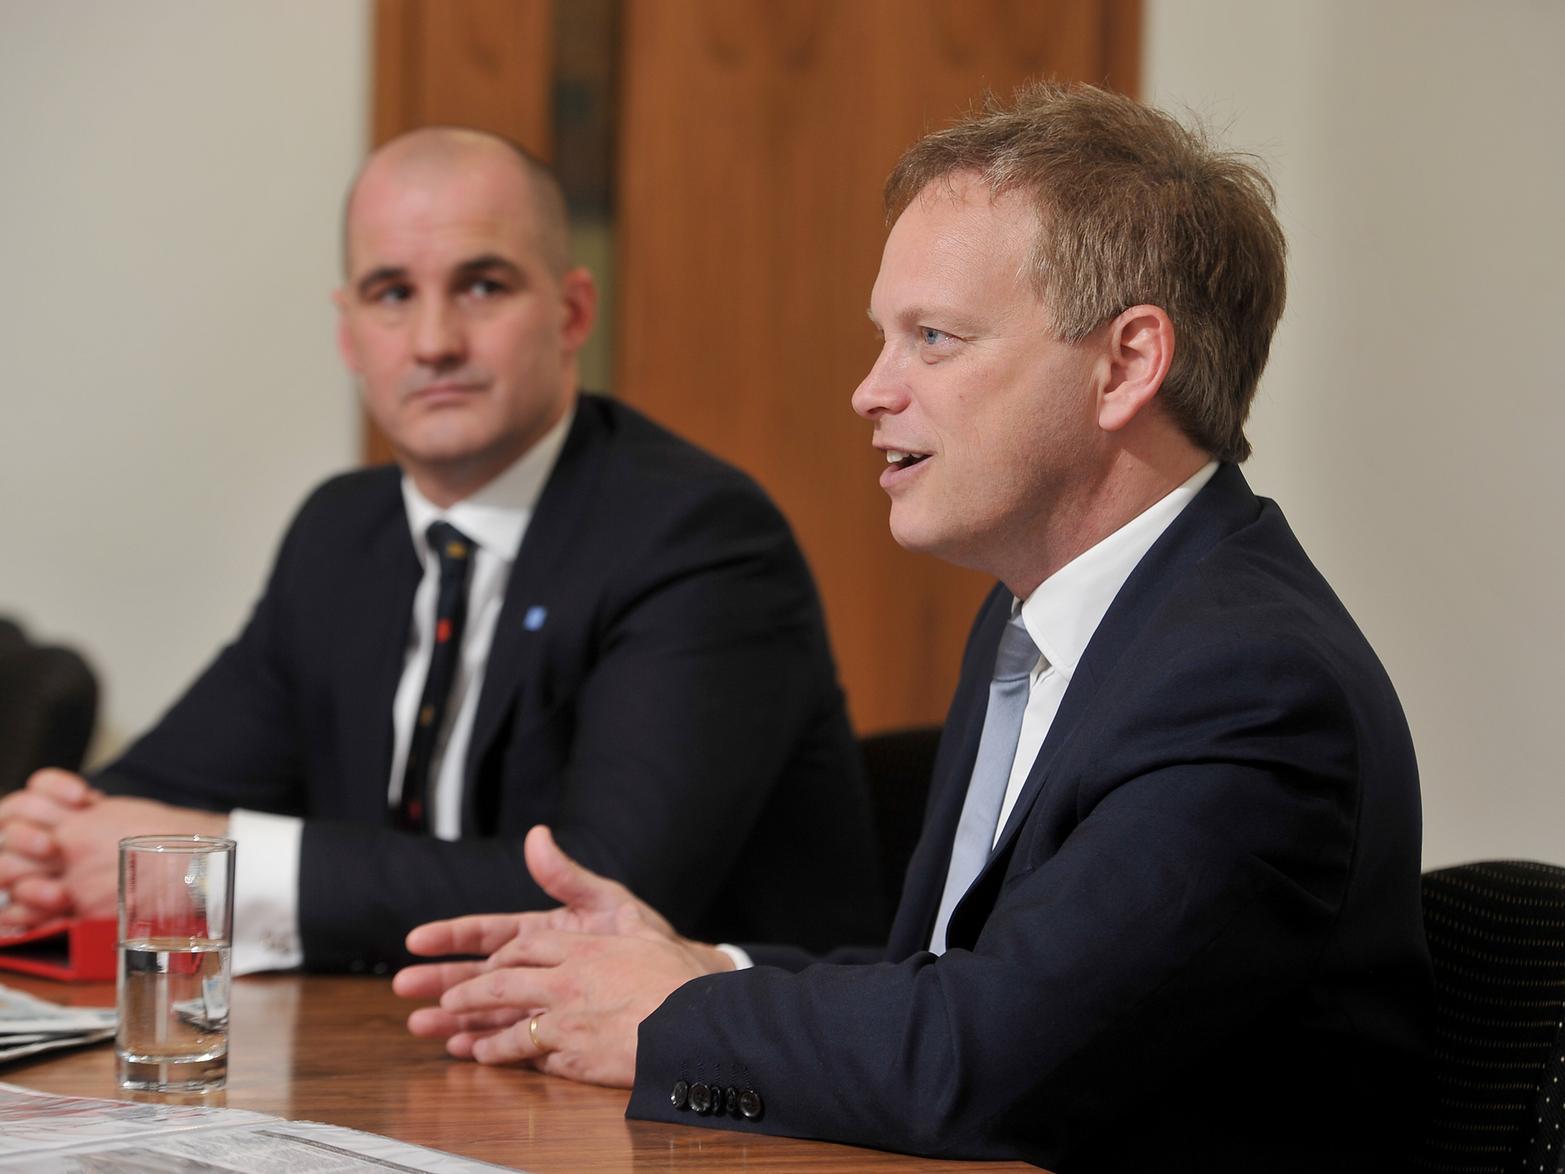 Northern Powerhouse Minister Jake Berry and Transport Secretary Grant Shapps at the Yorkshire Evening Post and Yorkshire Post's offices.